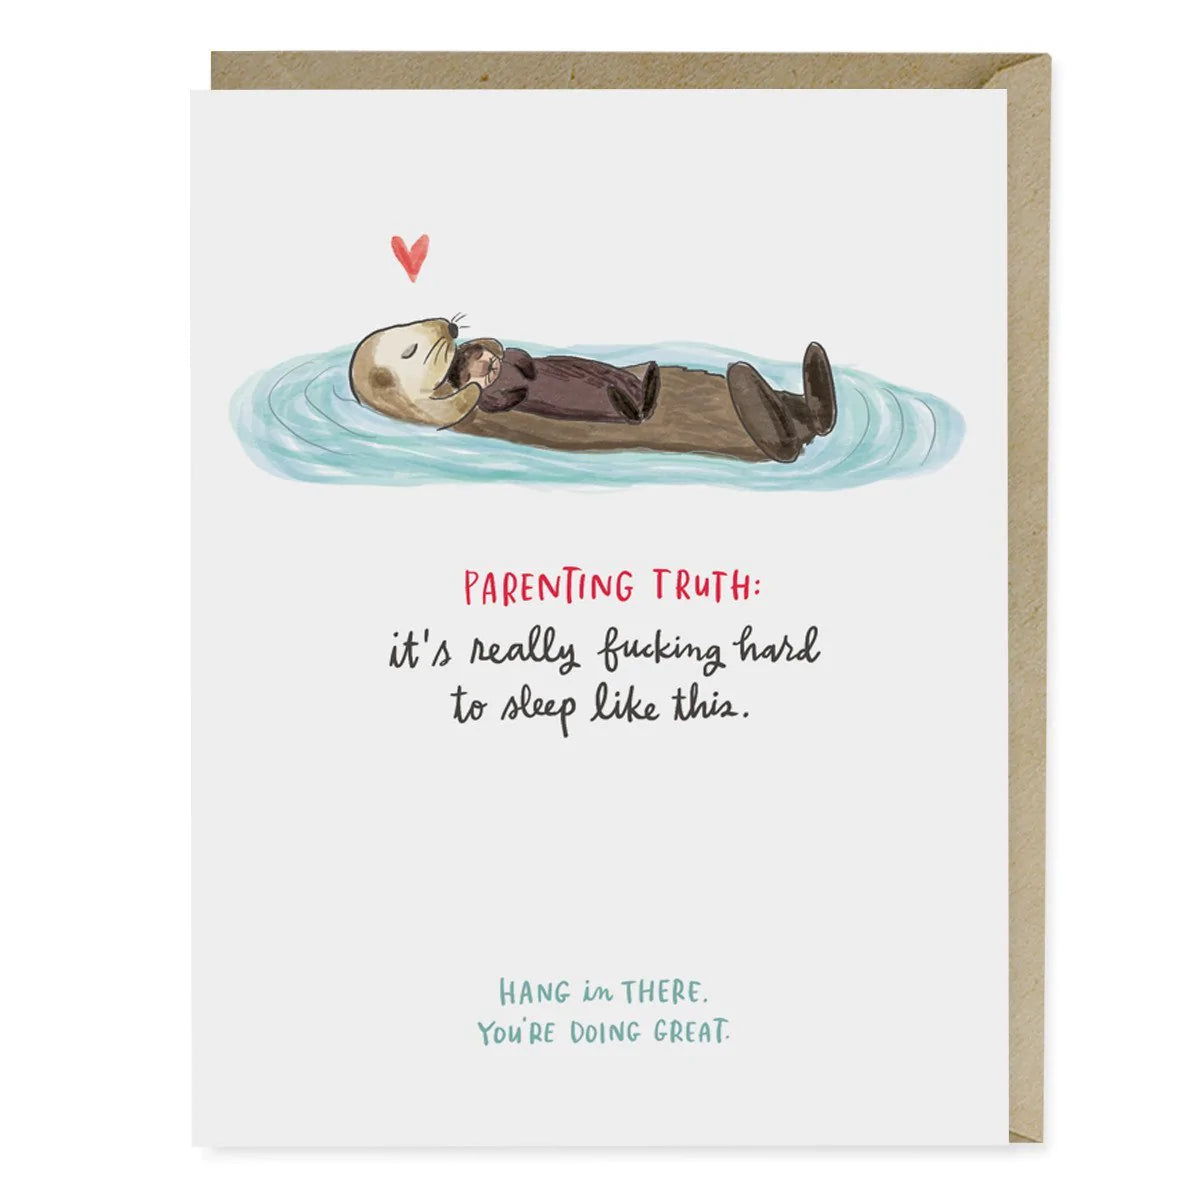 Baby Otter Parenting Card